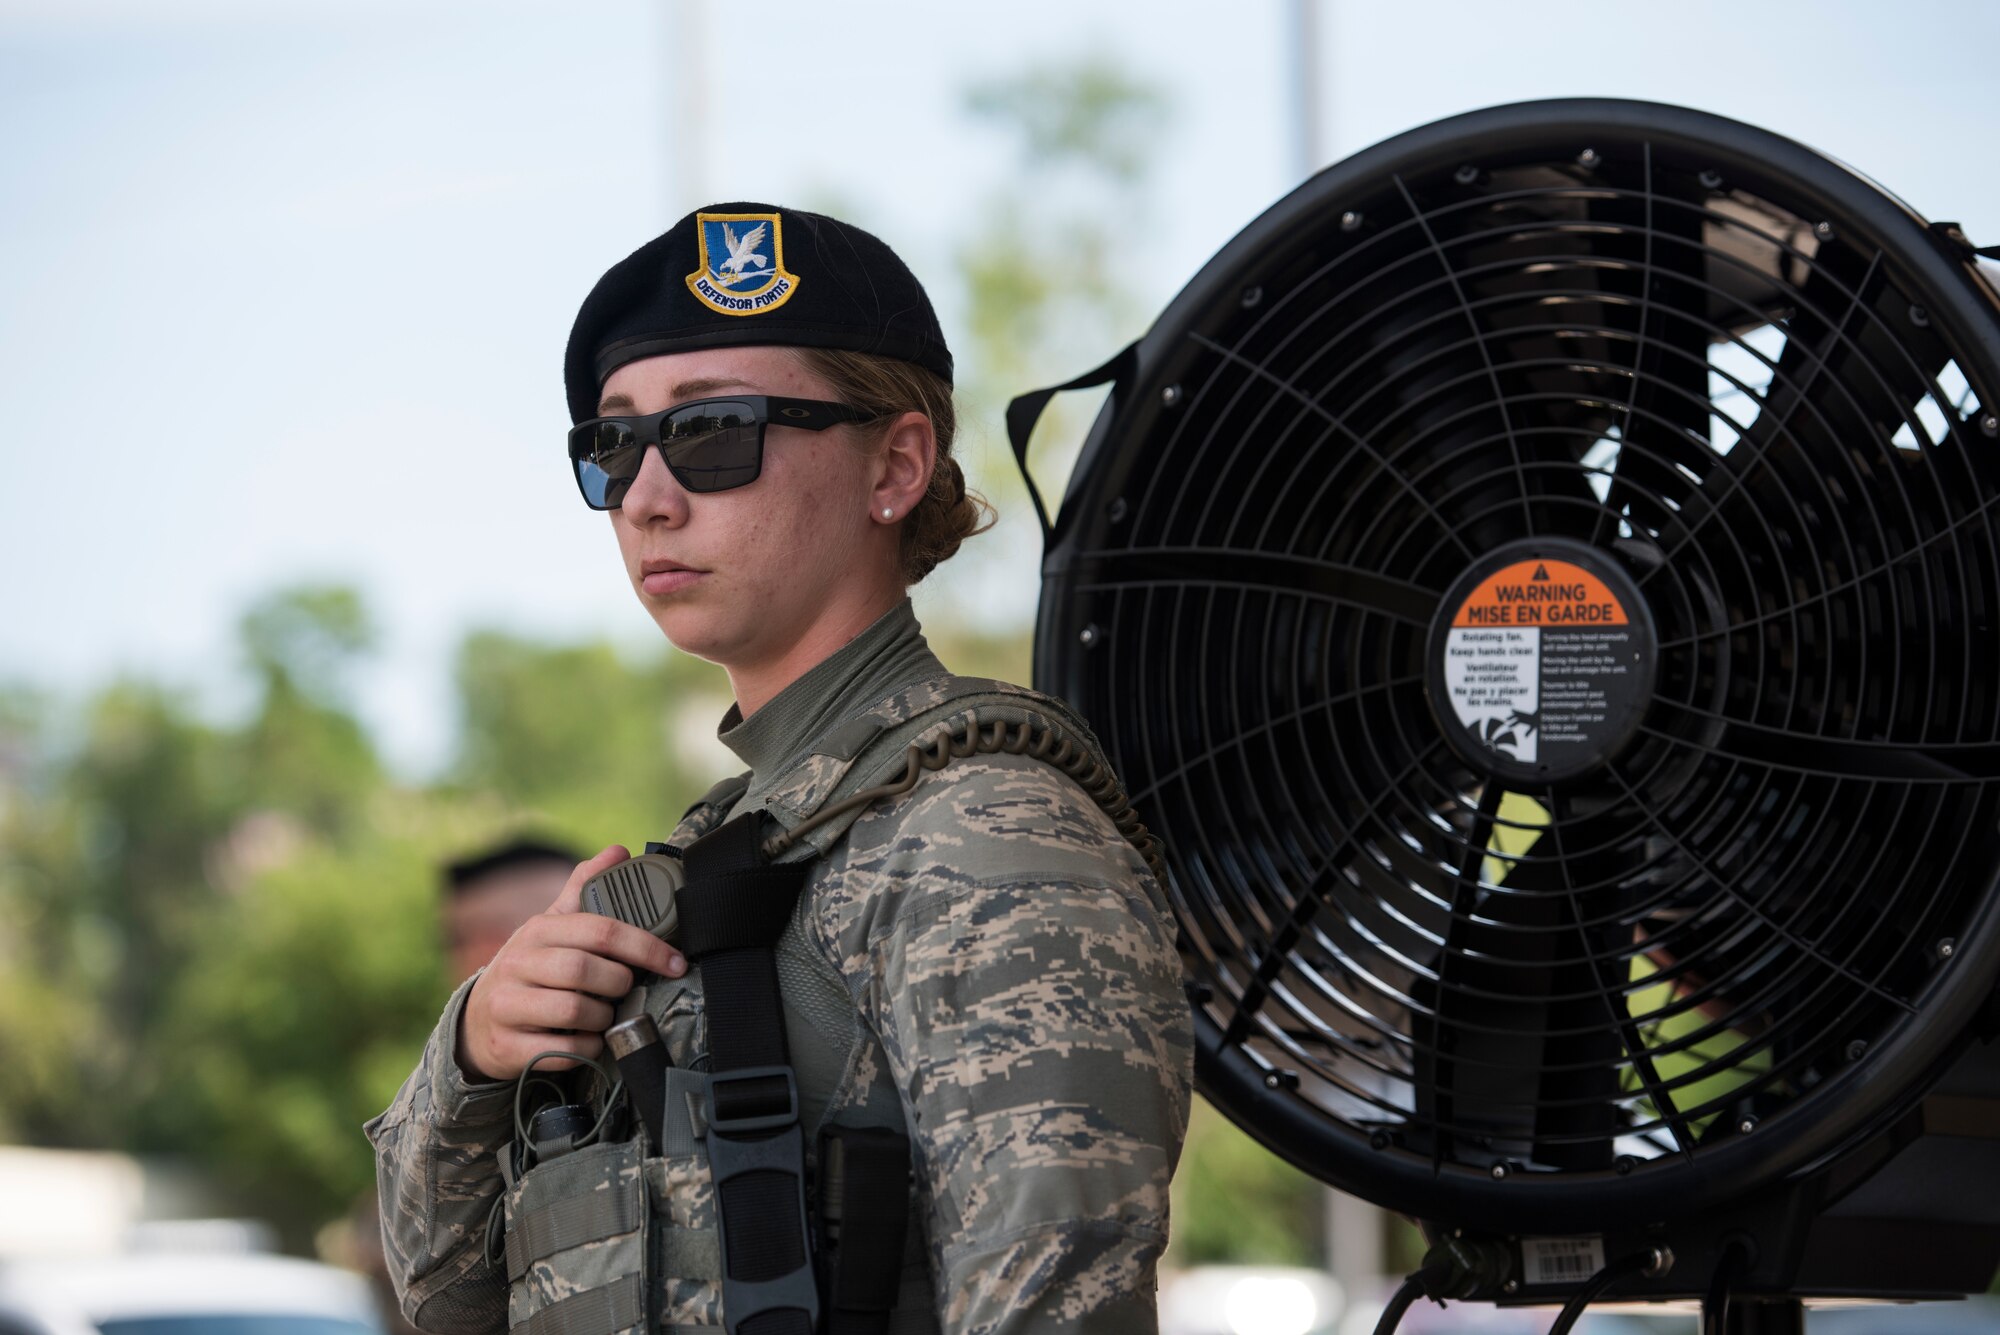 Airman 1st Class Leah Schuldt, 81st Security Forces Squadron entry controller, radios in an exercise situation at a gate during a ride-along at Keesler Air Force Base, Miss. May 17, 2018. The ride-along program is part of the SFS community involvement initiative where anyone, age 15 and up and with base access, can see what its like to be a defender. If you are interested in the ride-along program, please contact Tech. Sgt. Matthew Oleson at 376-6601. (U.S. Air Force photo by Senior Airman Travis Beihl)